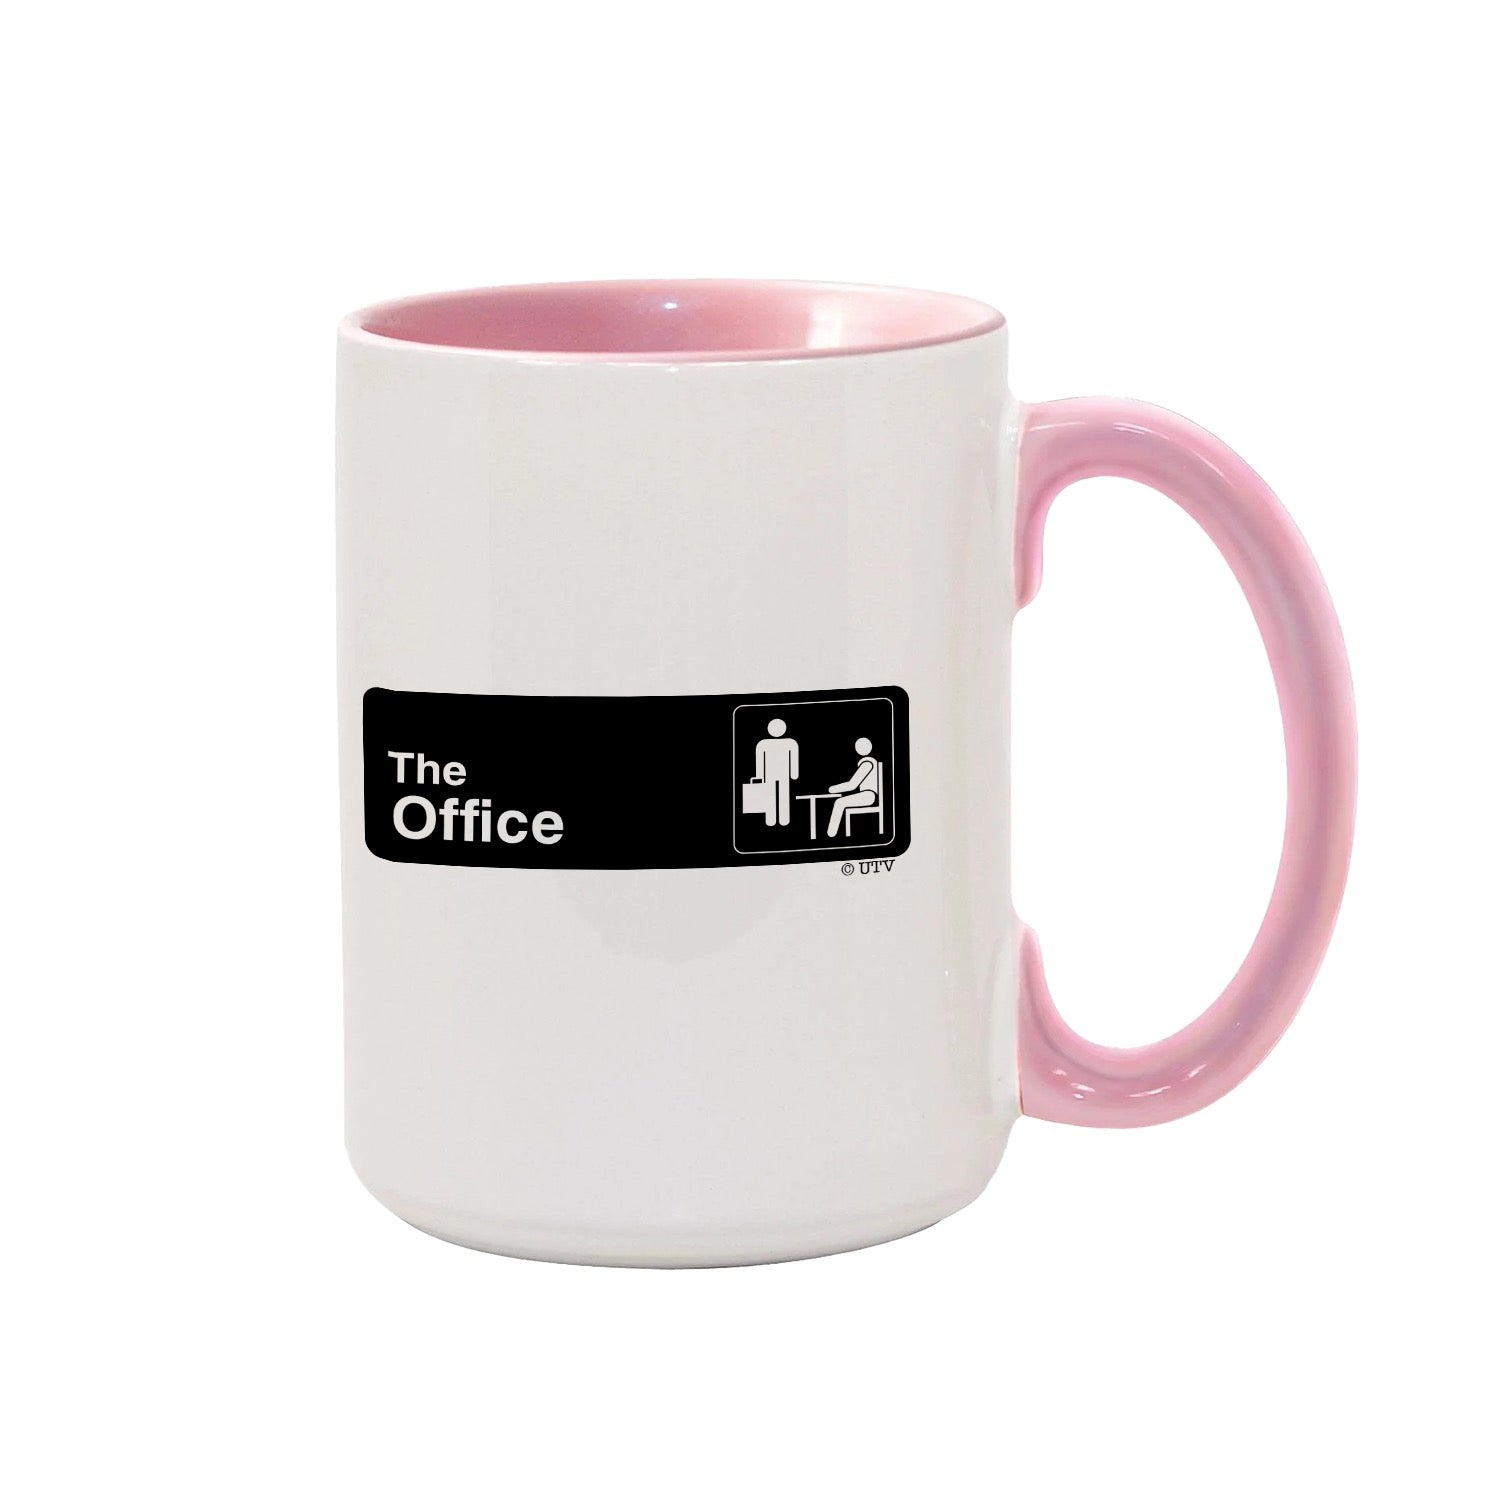 The Office Cute Collection Party Planning Committee Two-Tone Mug